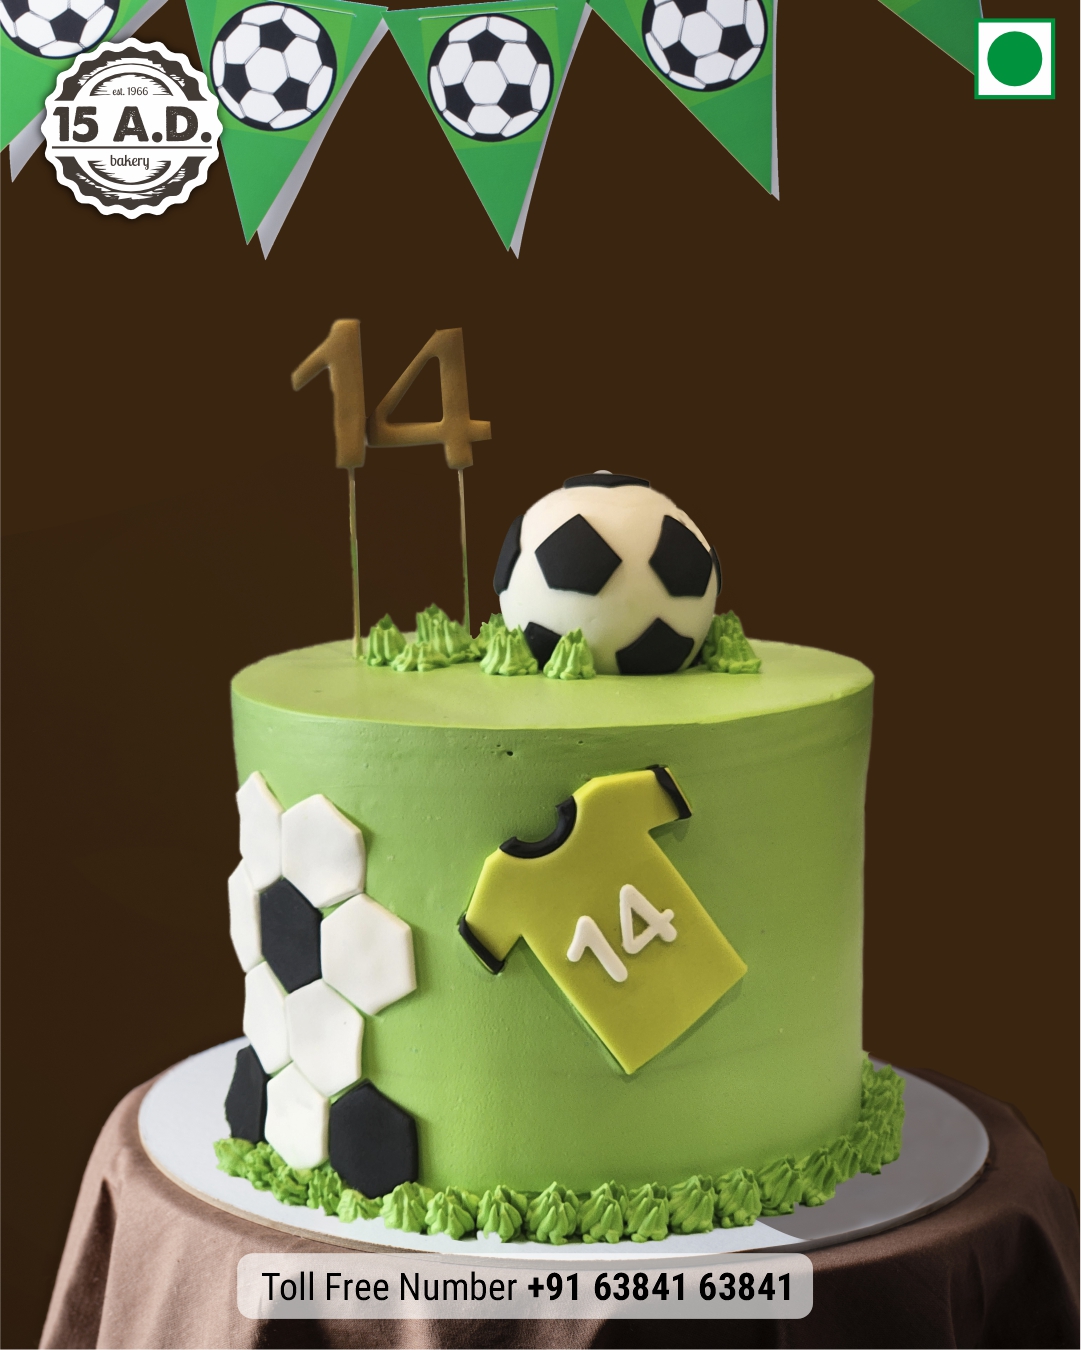 Sports Cake by 15 AD Bakery